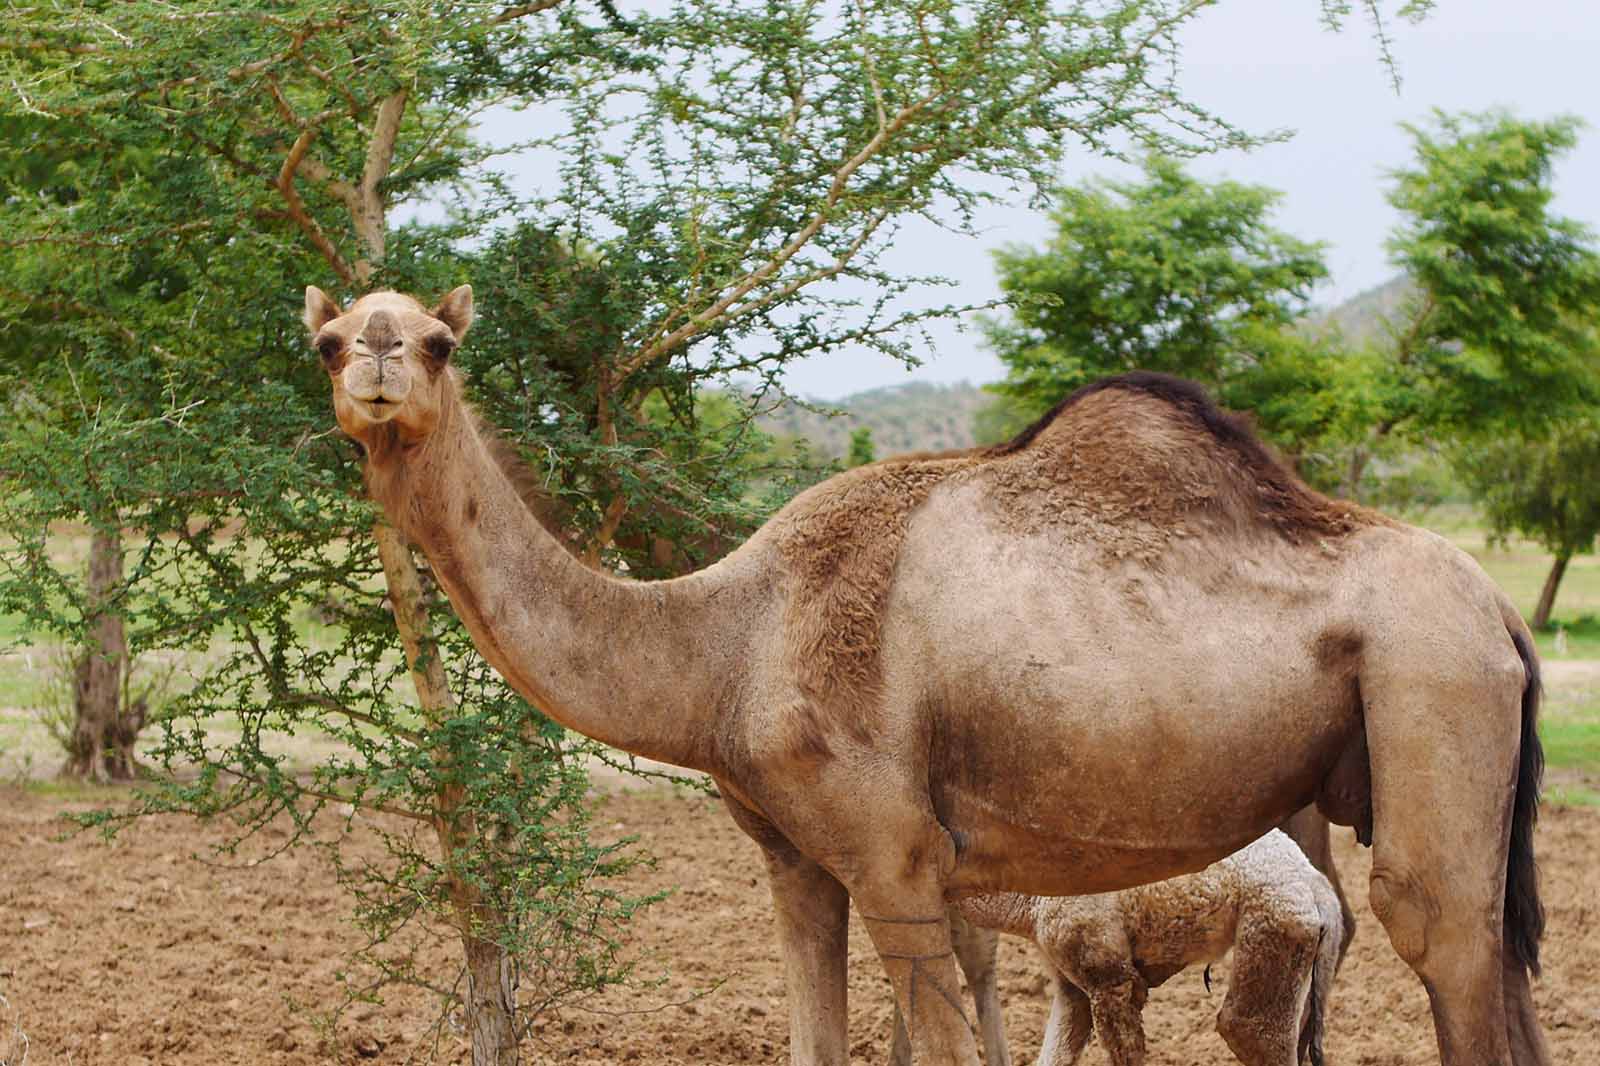 A Camel in Chad